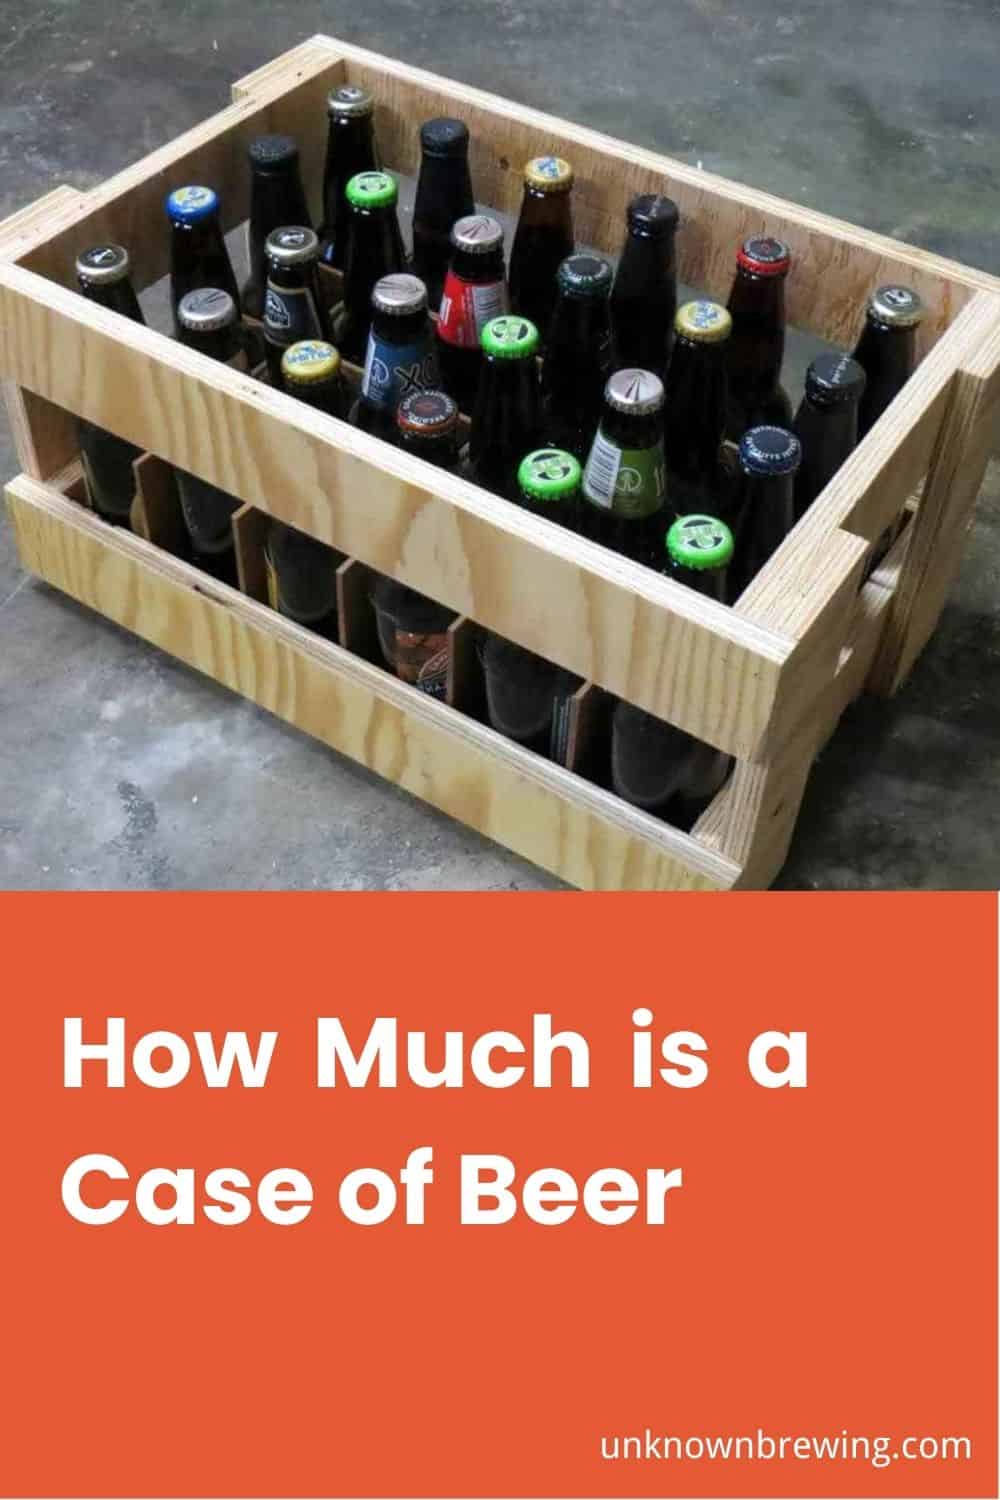 How Much is Case of Beer